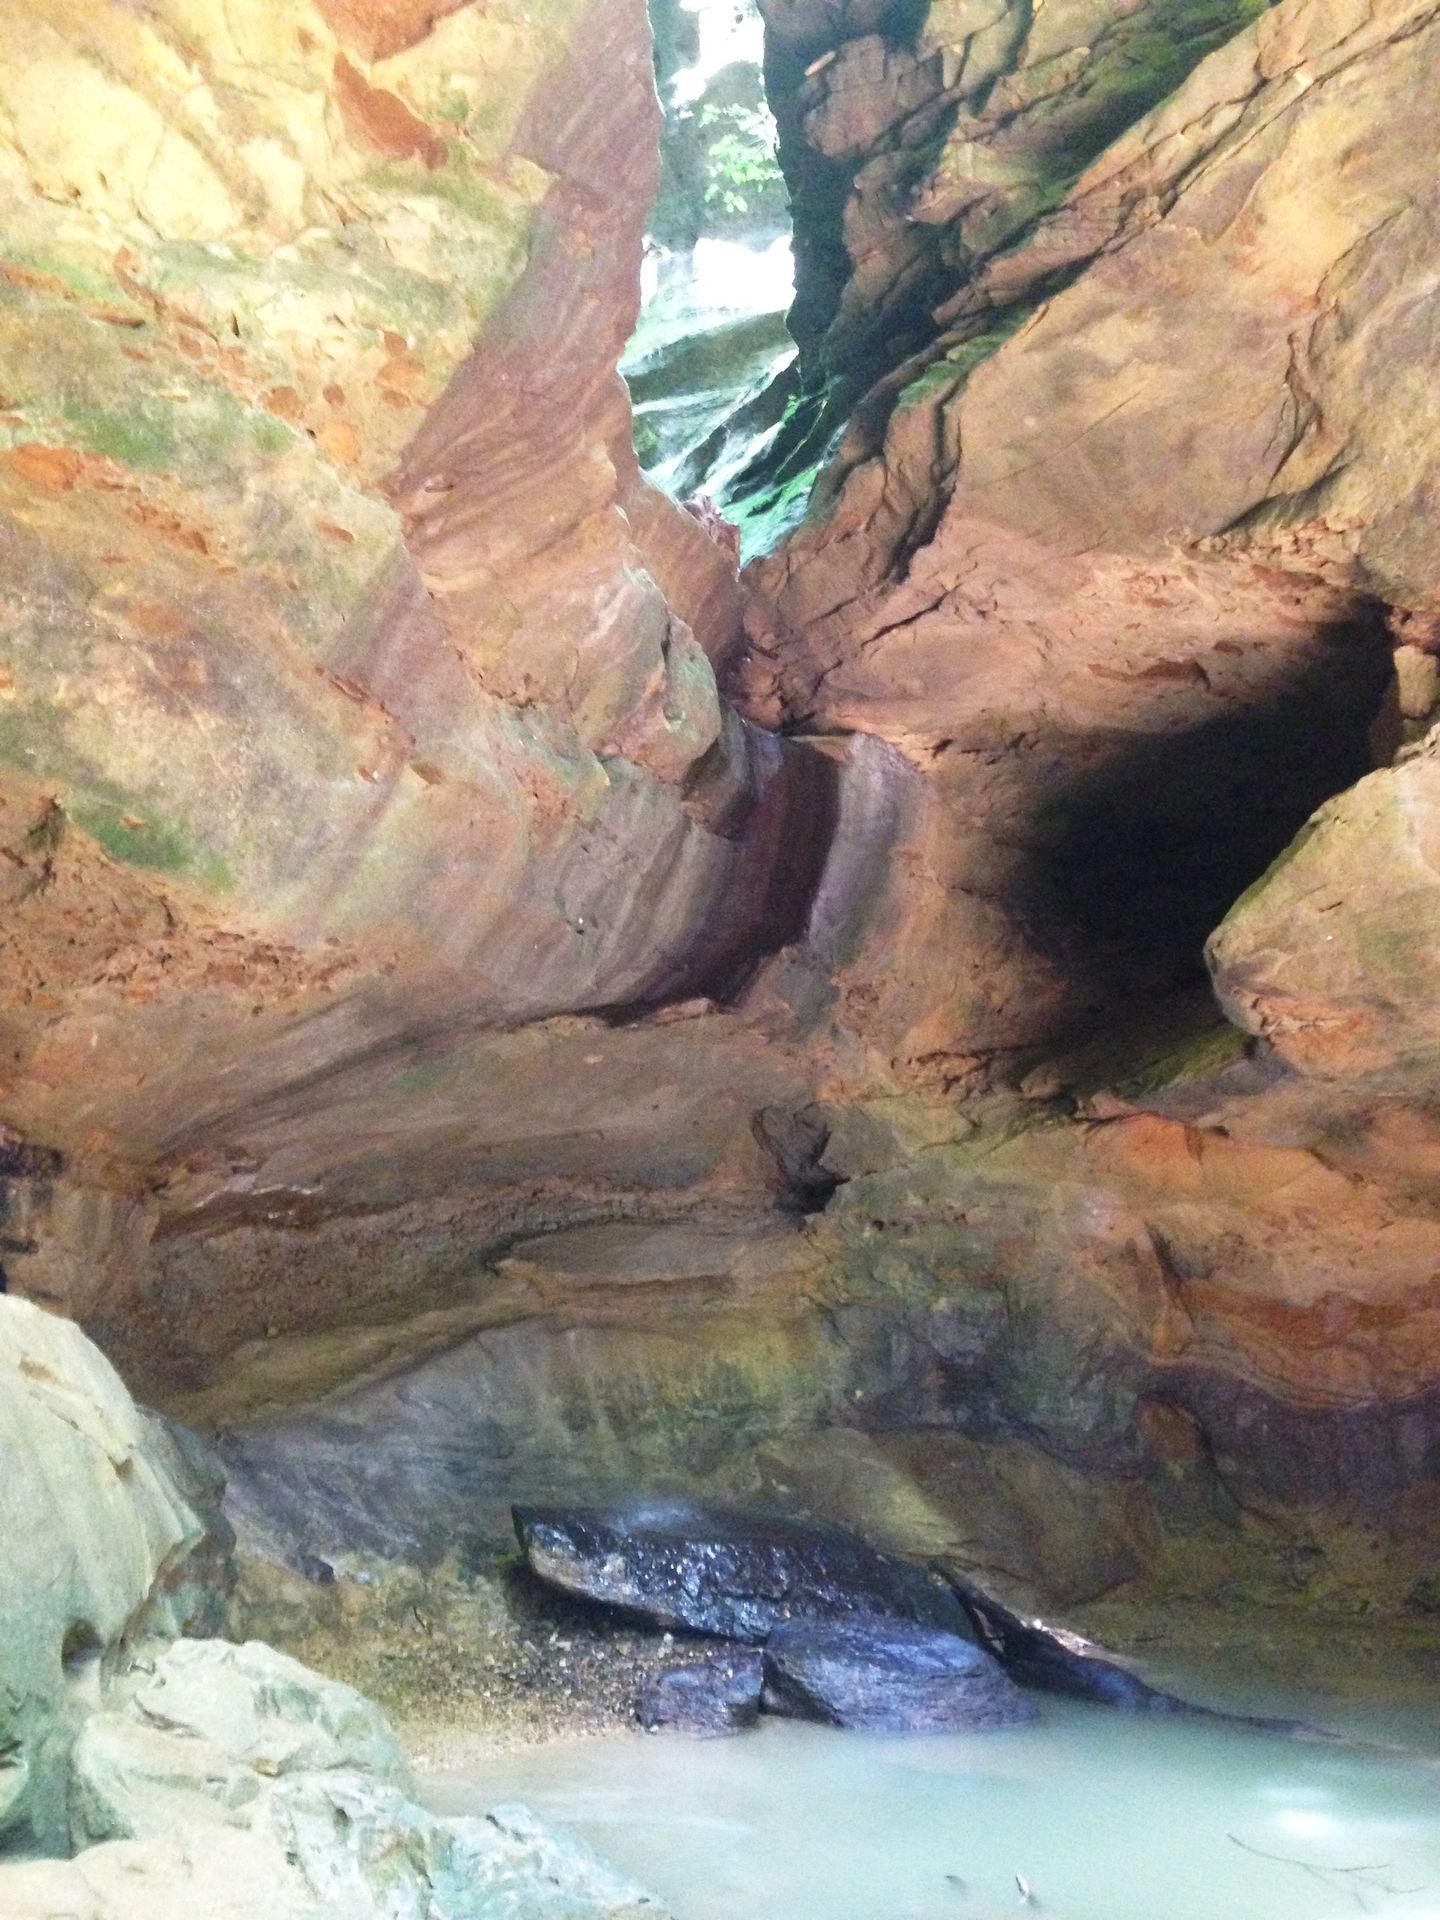 The inside of the grotto at Conkles Hollow State Nature Preserve